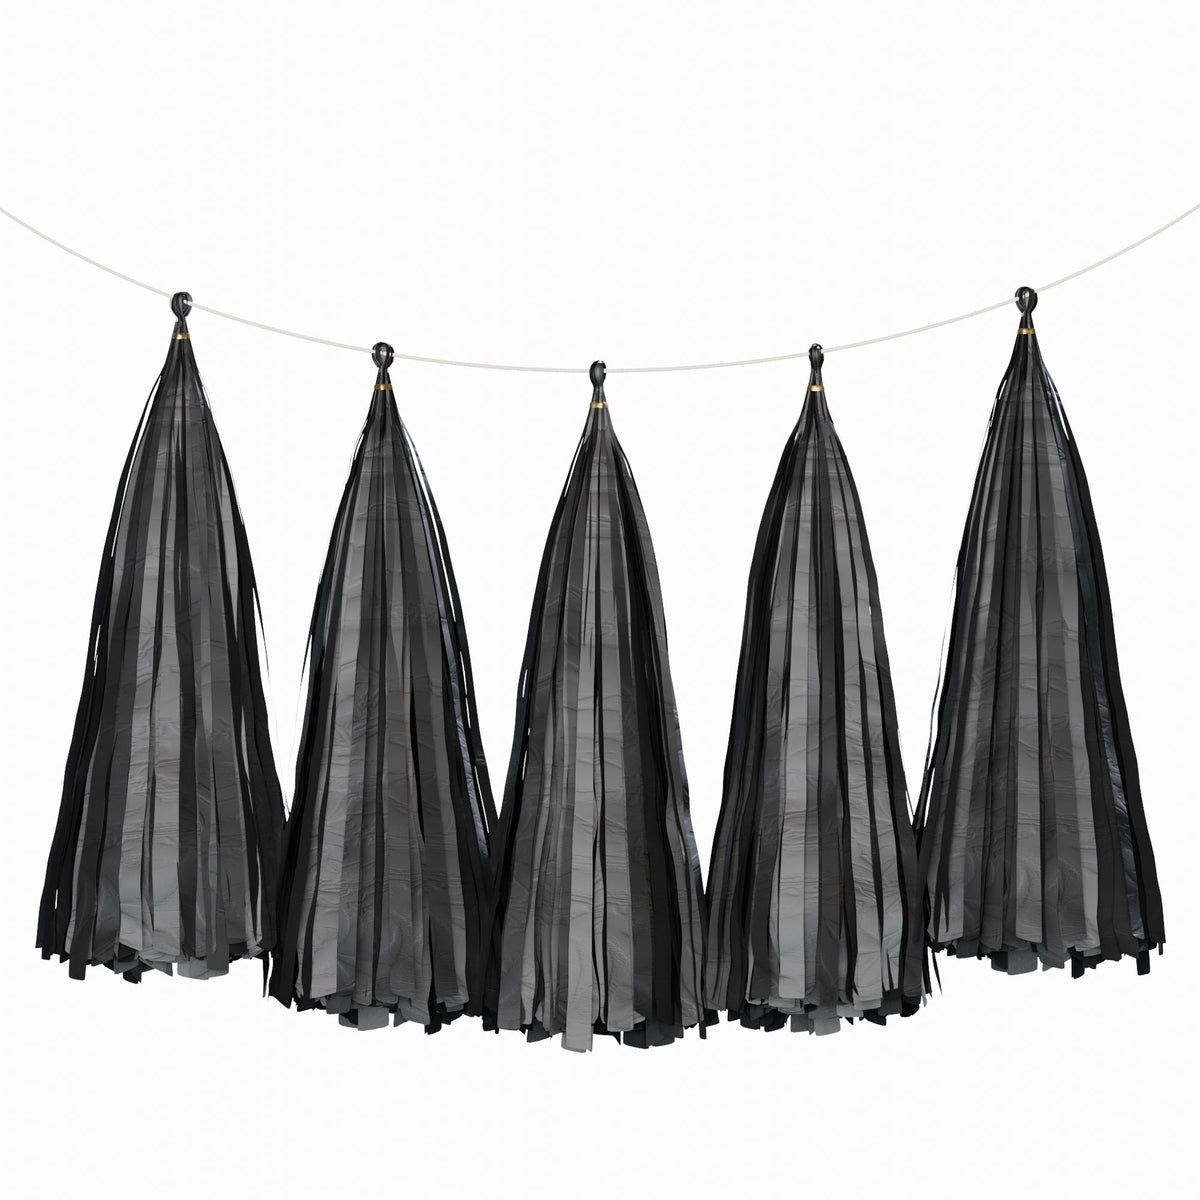 Weifang Mayshine Imp&exp co Decorations Black Tassel Garland, 5 Count 810064197215